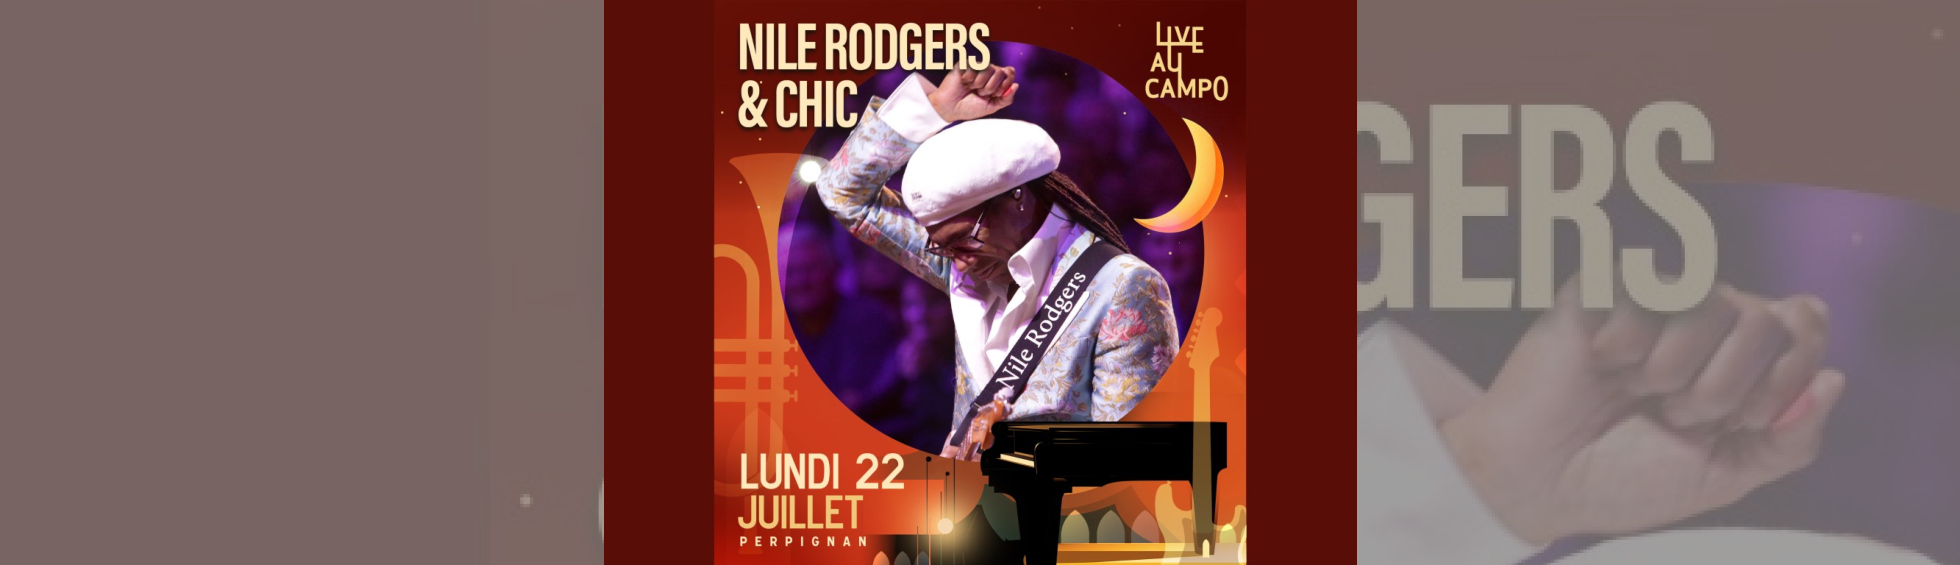 Photo N°1 : LIVE AU CAMPO - NILE RODGERS & CHIC